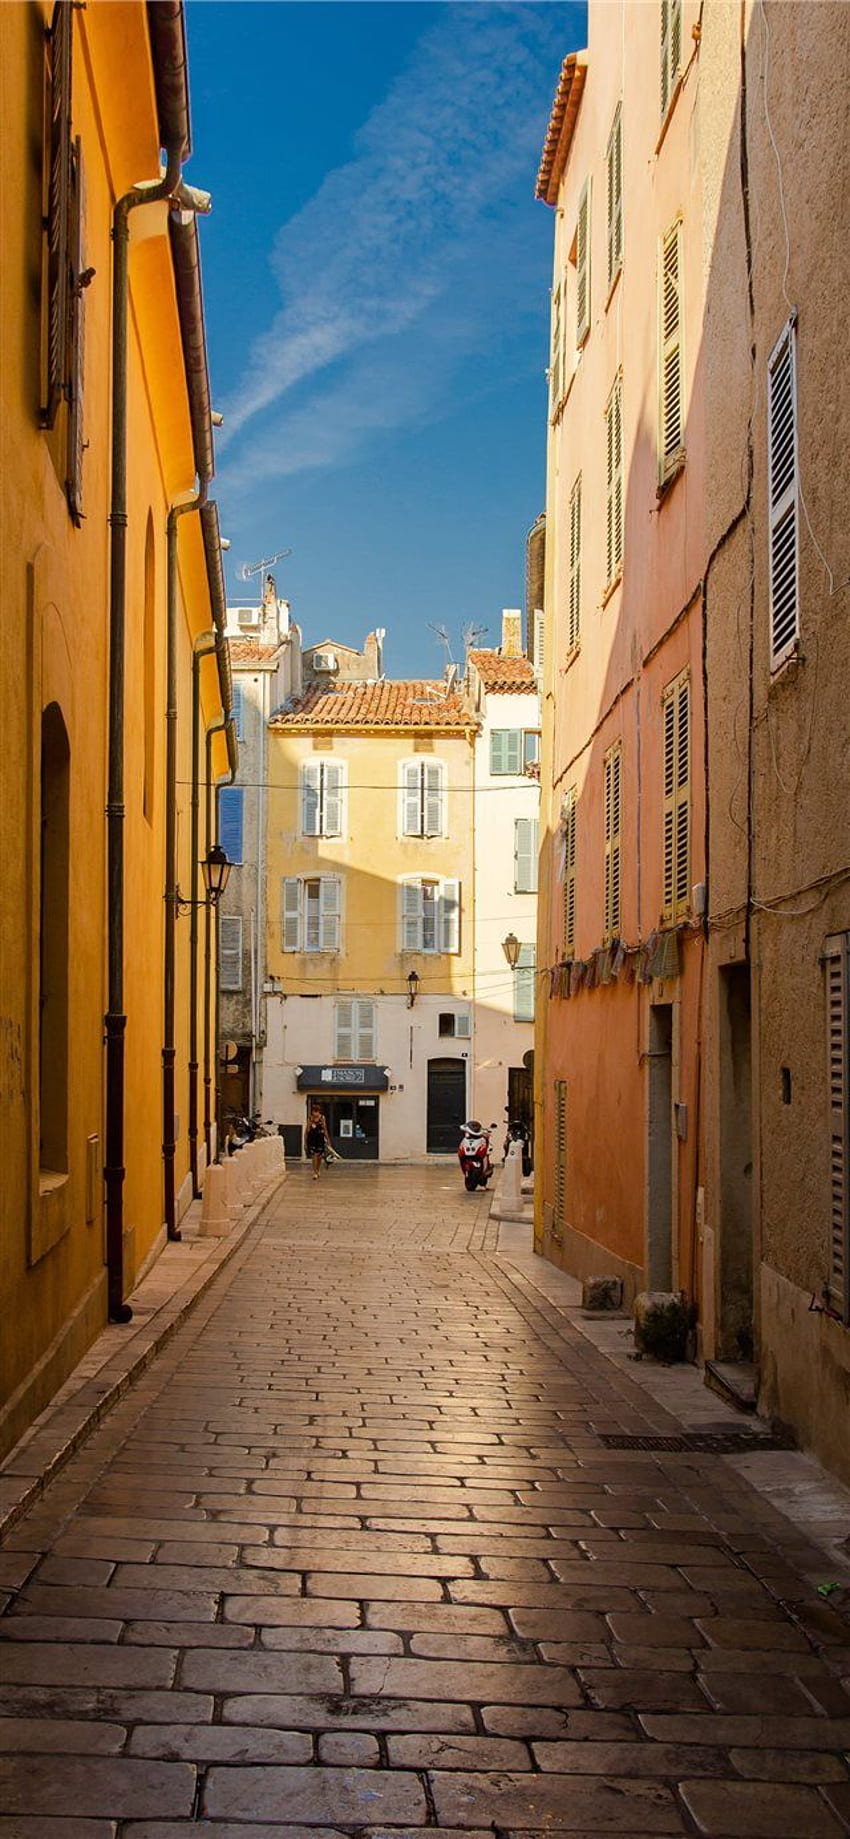 Saint Tropez France iPhone X . Android nature HD phone wallpaper